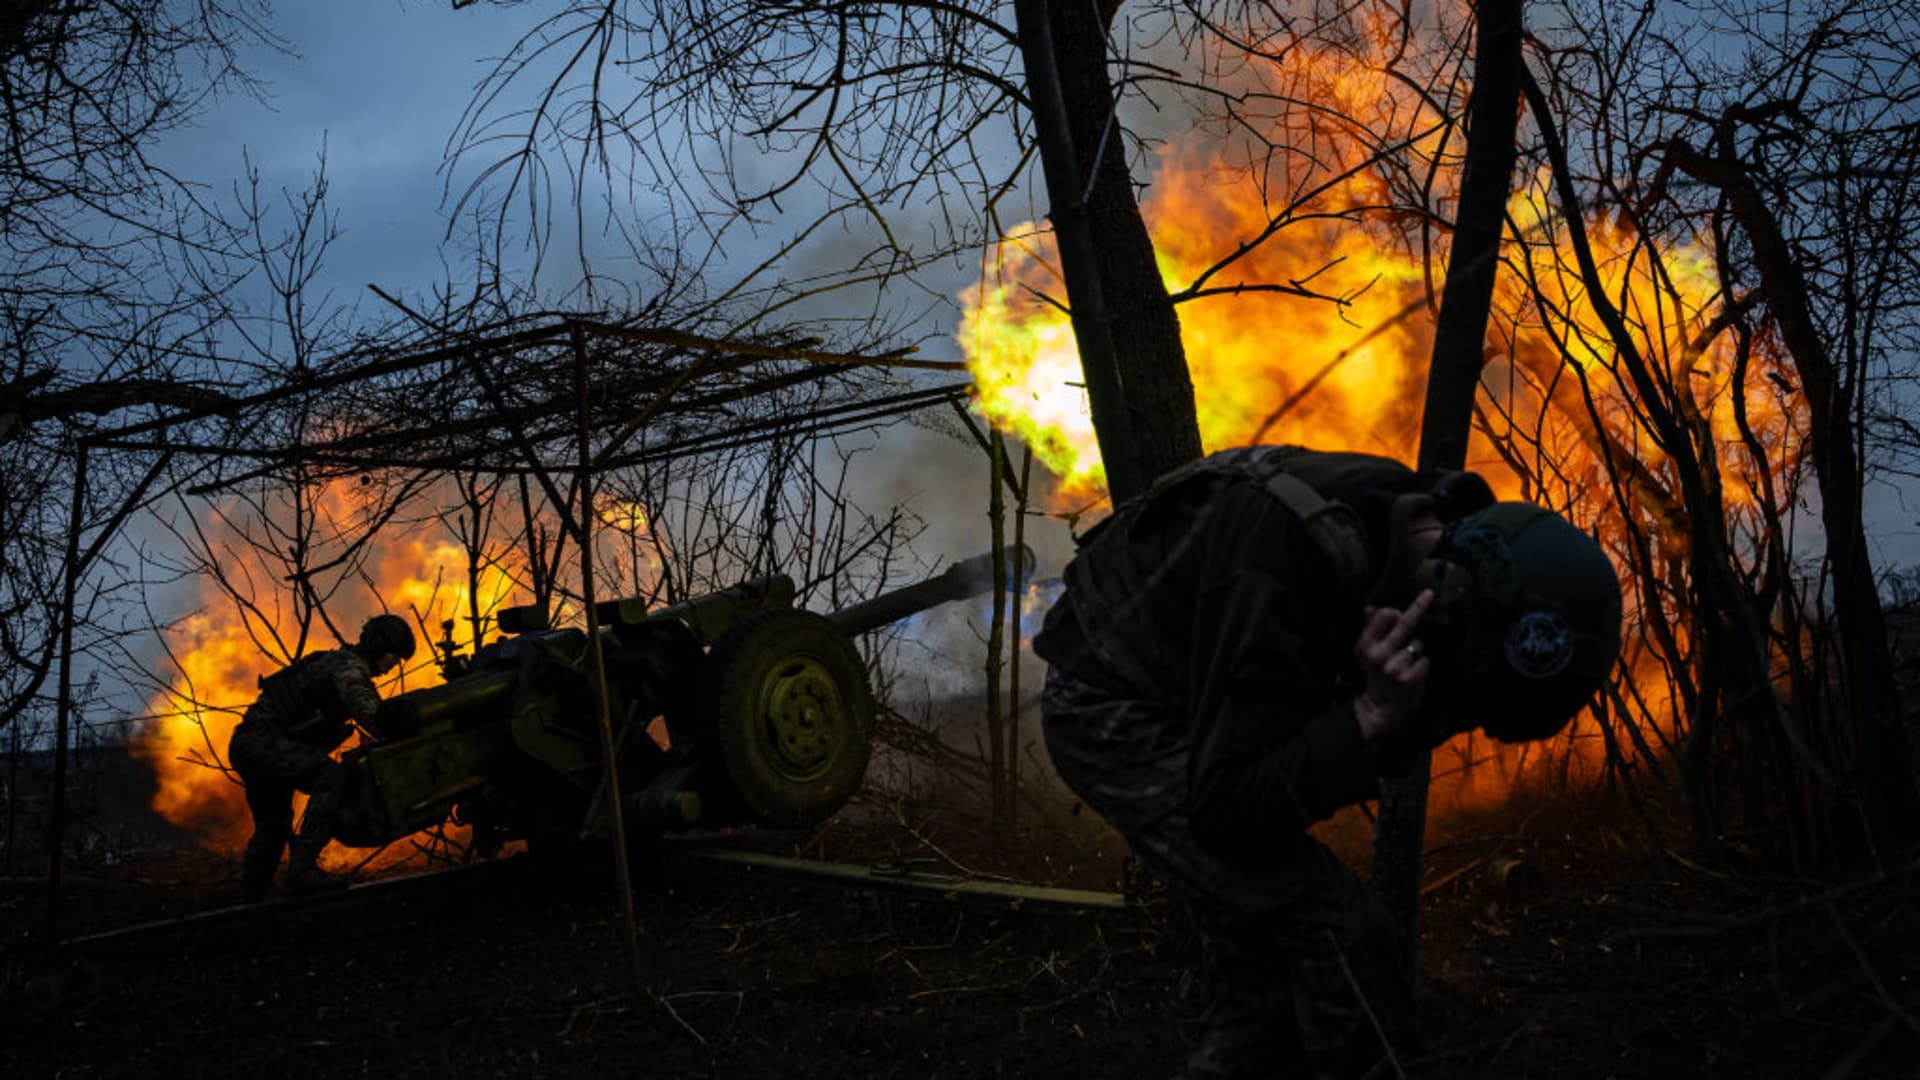 Ukrainian servicemen from the 10th Brigade fire a D-30 Howitzer towards Russian infantry along the frontline outside of Soledar, Ukraine on March 11, 2023.